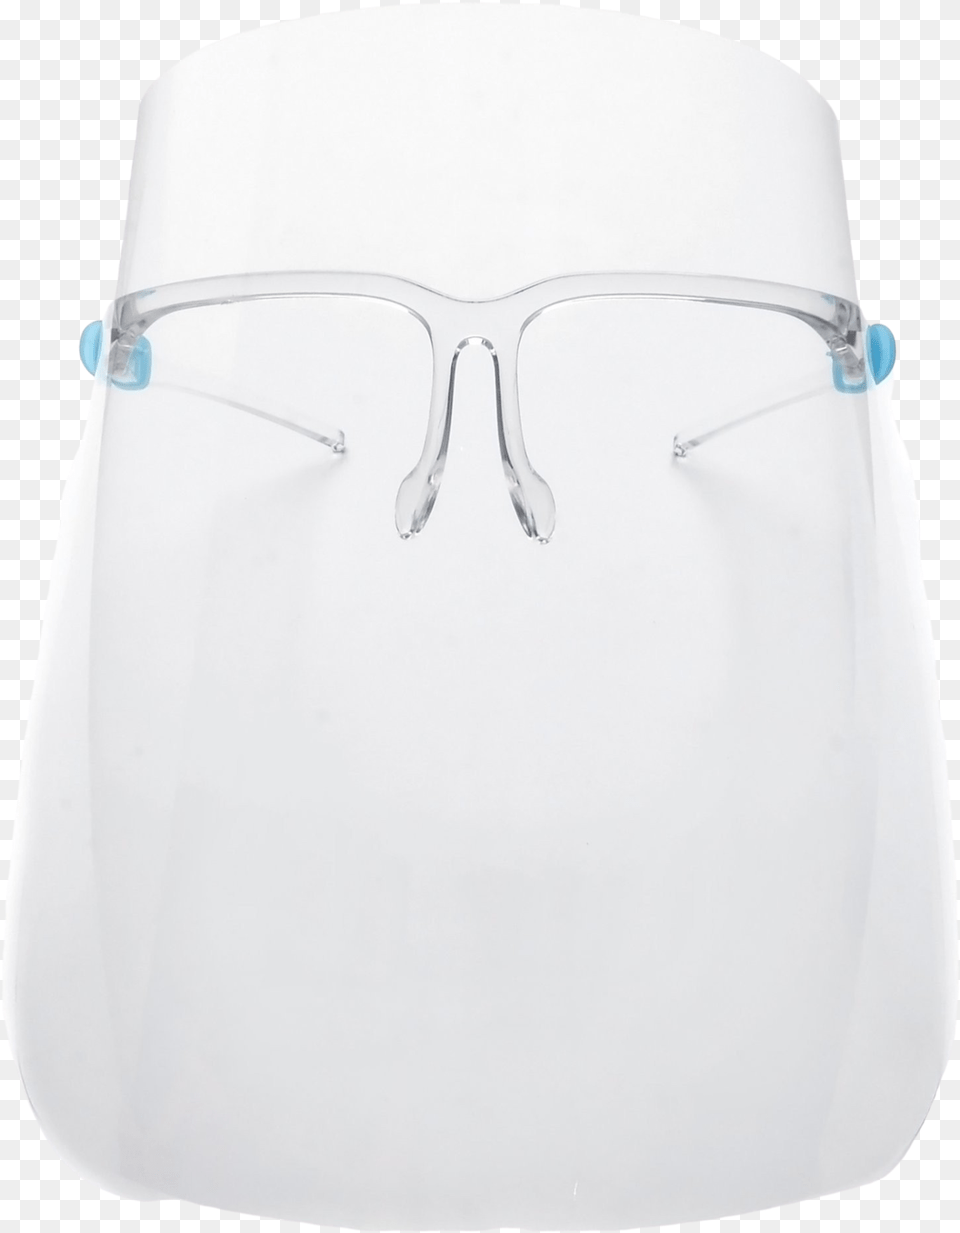 Fully Transparent Protective Face Shield With Clear Glasses Frame Eyeglass Style, Accessories, Helmet Png